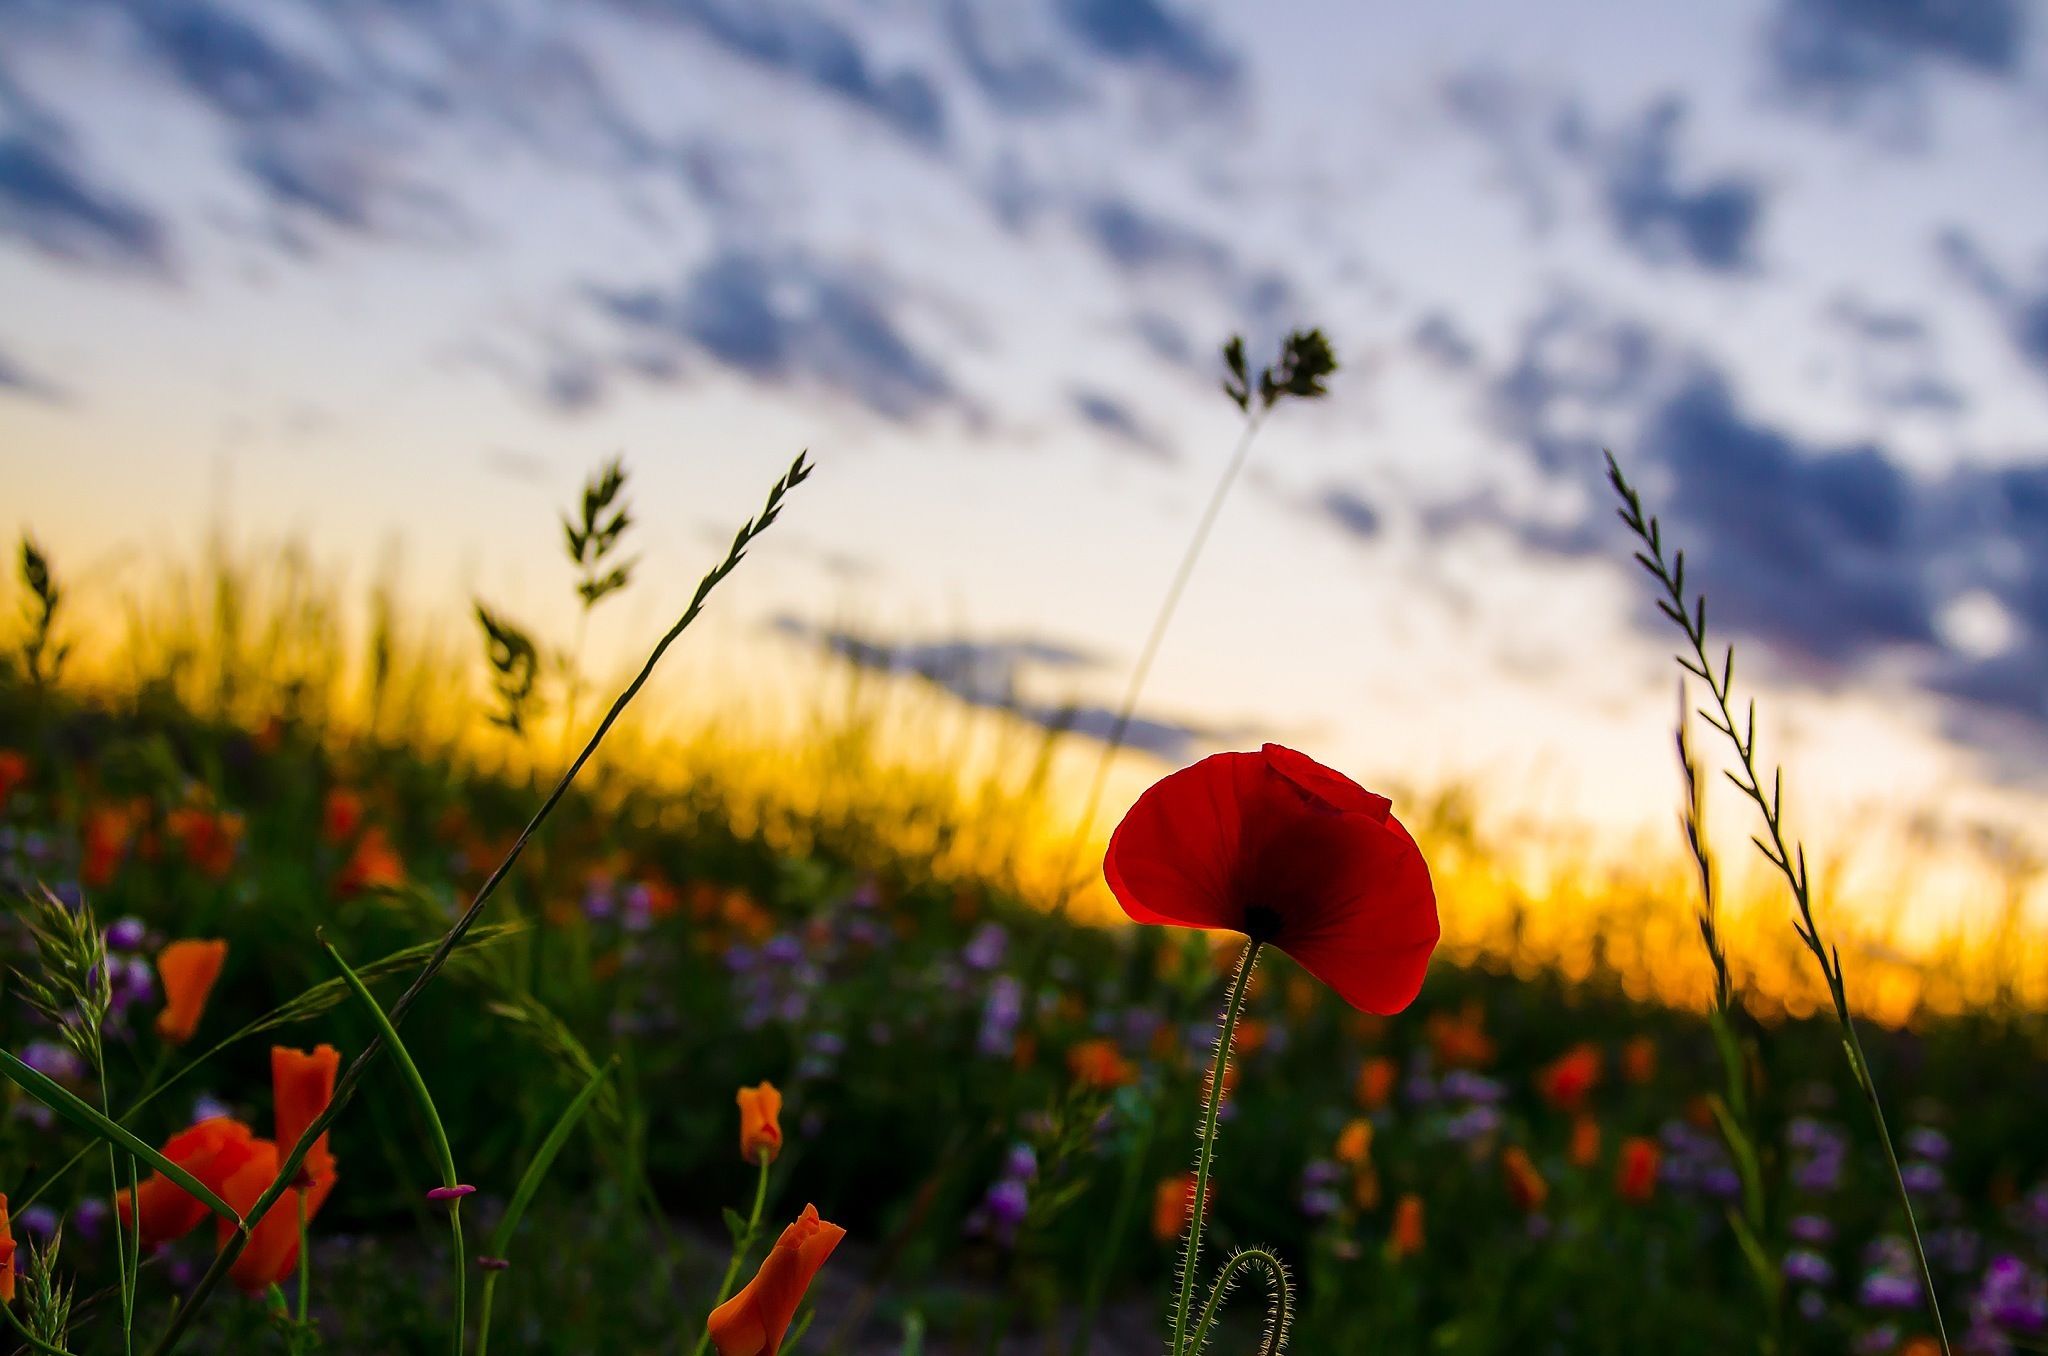 flower, growth, freshness, beauty in nature, sky, fragility, field, plant, focus on foreground, nature, stem, petal, poppy, flower head, sunset, blooming, cloud - sky, close-up, red, tranquility